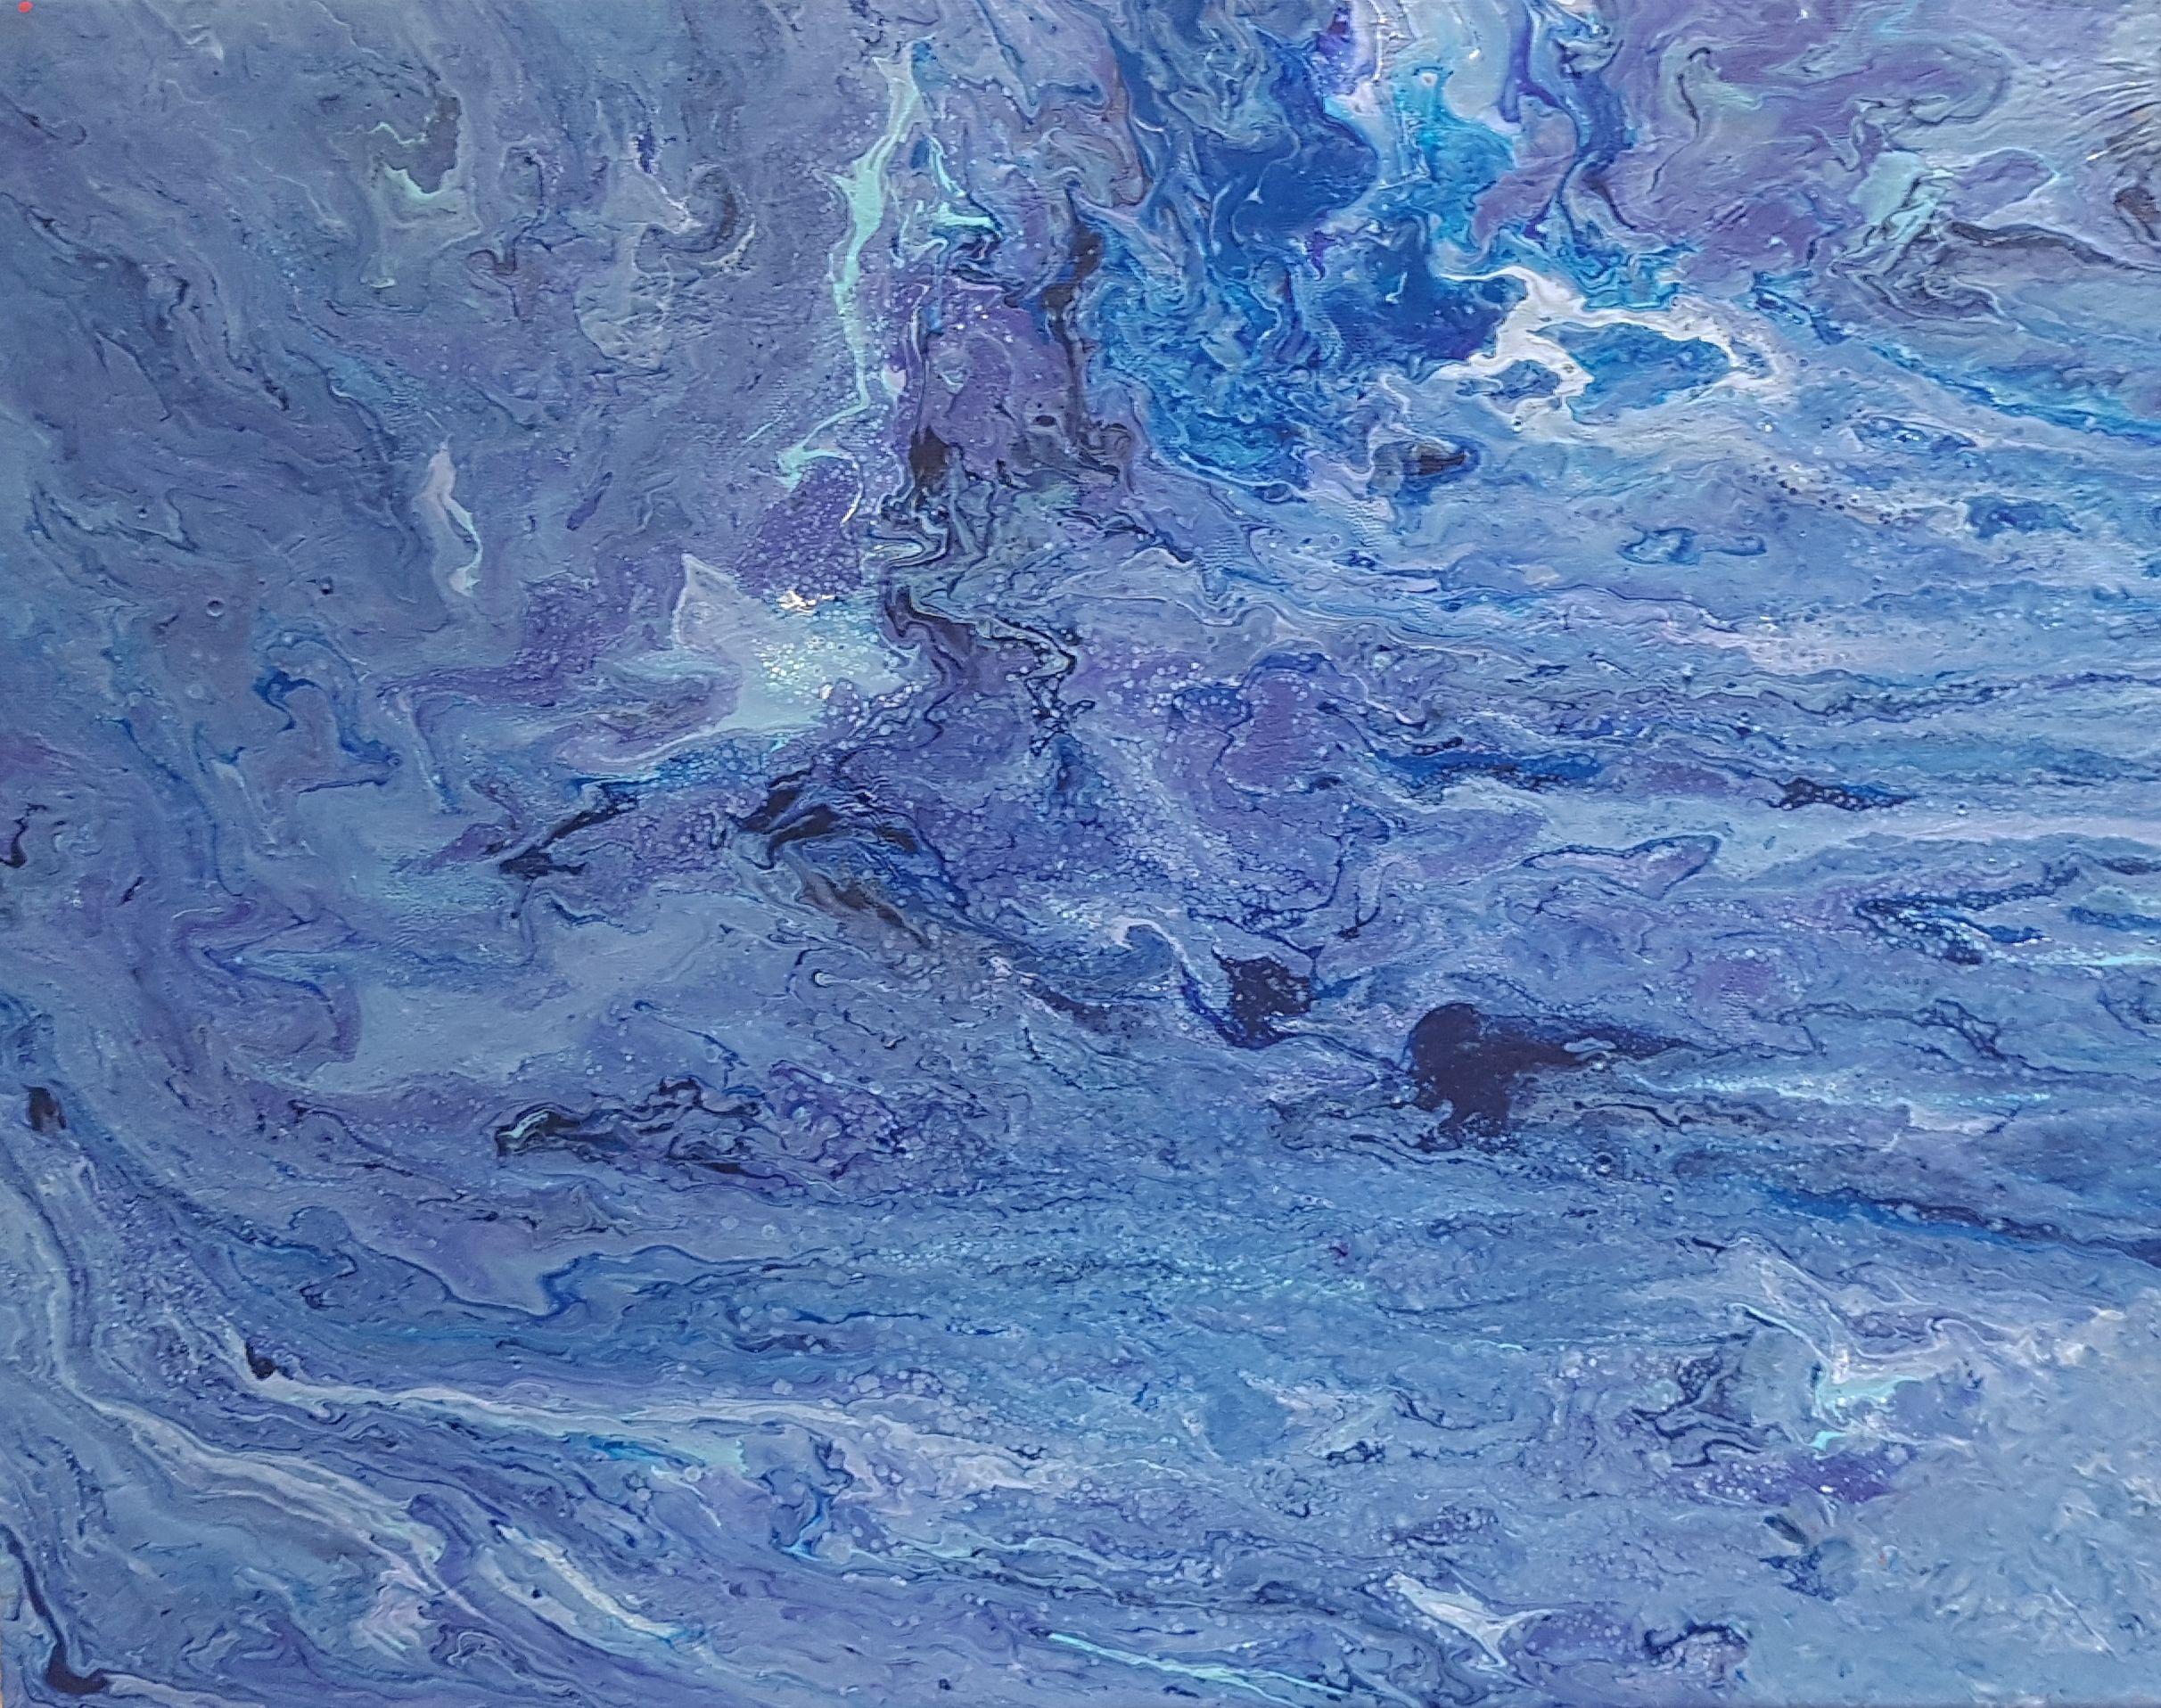 Ocean blue is a calming, original abstract fluid painting that exudes the refreshing feeling you get when you stare at a beautiful blue ocean on a hot summers day. Light, medium and dark blue tones blend and create spontaneous, flowing movement.   